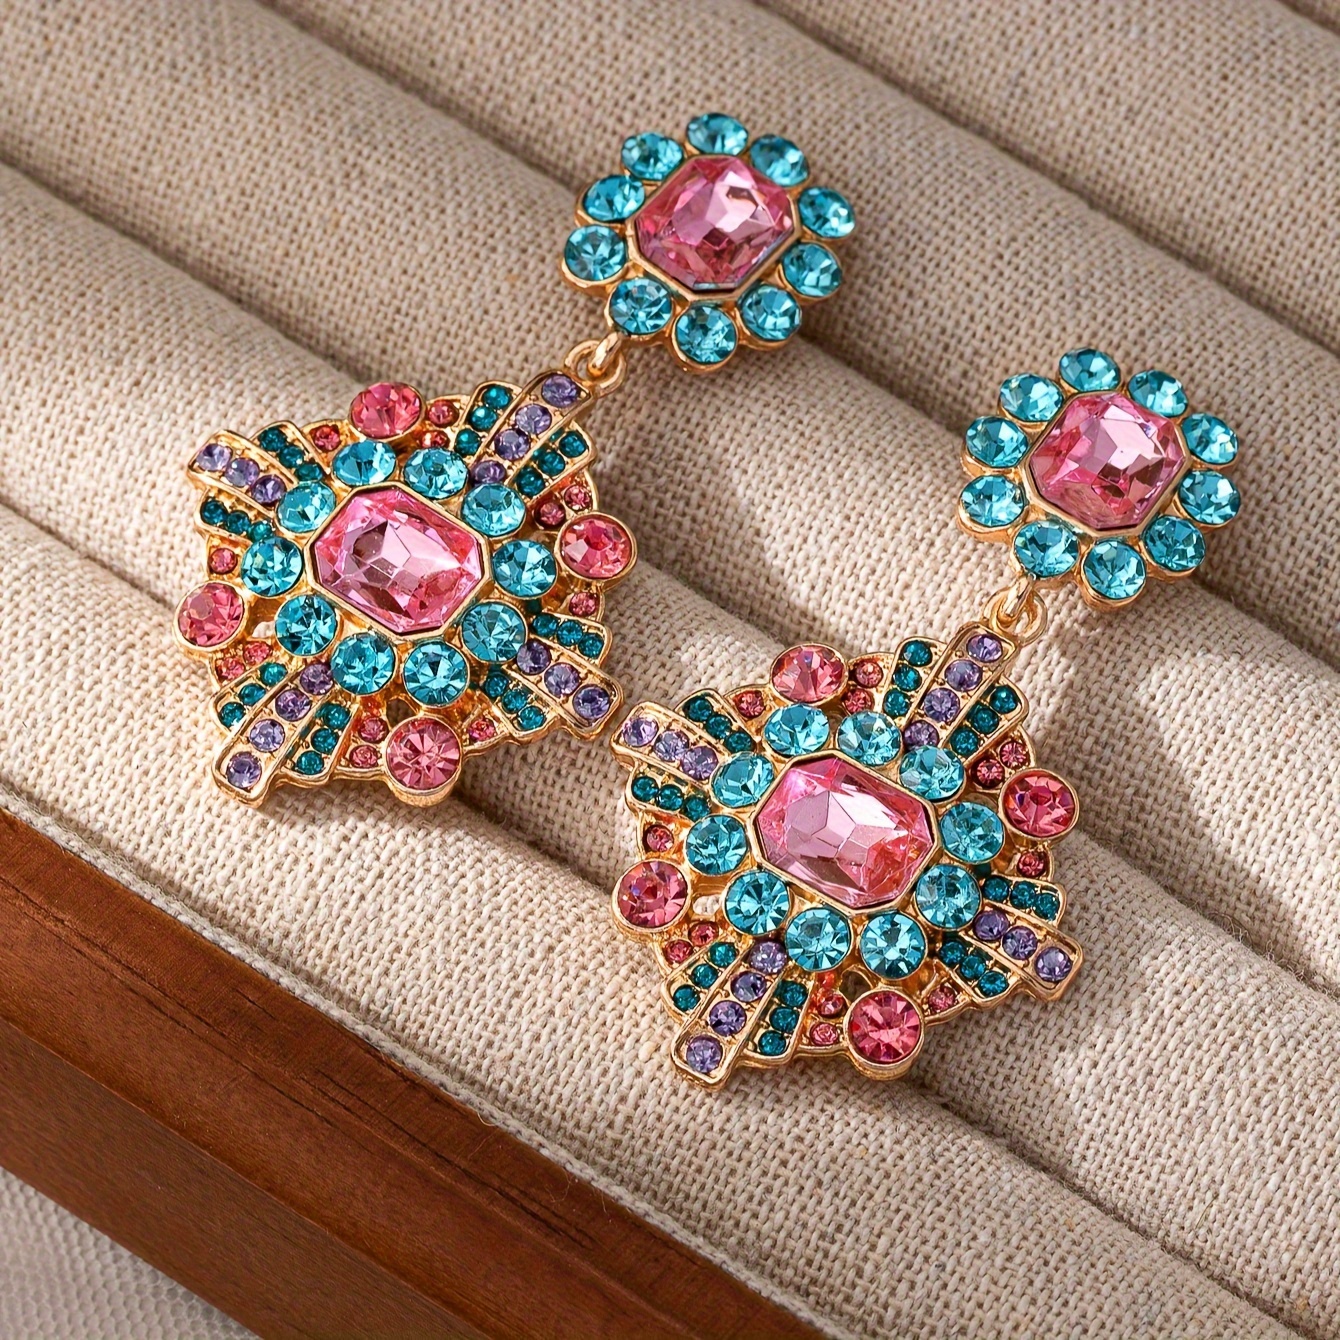 

Medieval Dangle Earrings Retro Sparkling Flower Design Inlaid Rhinestone Match Daily Outfits Evening Party Decor Dupes Luxury Jewelry